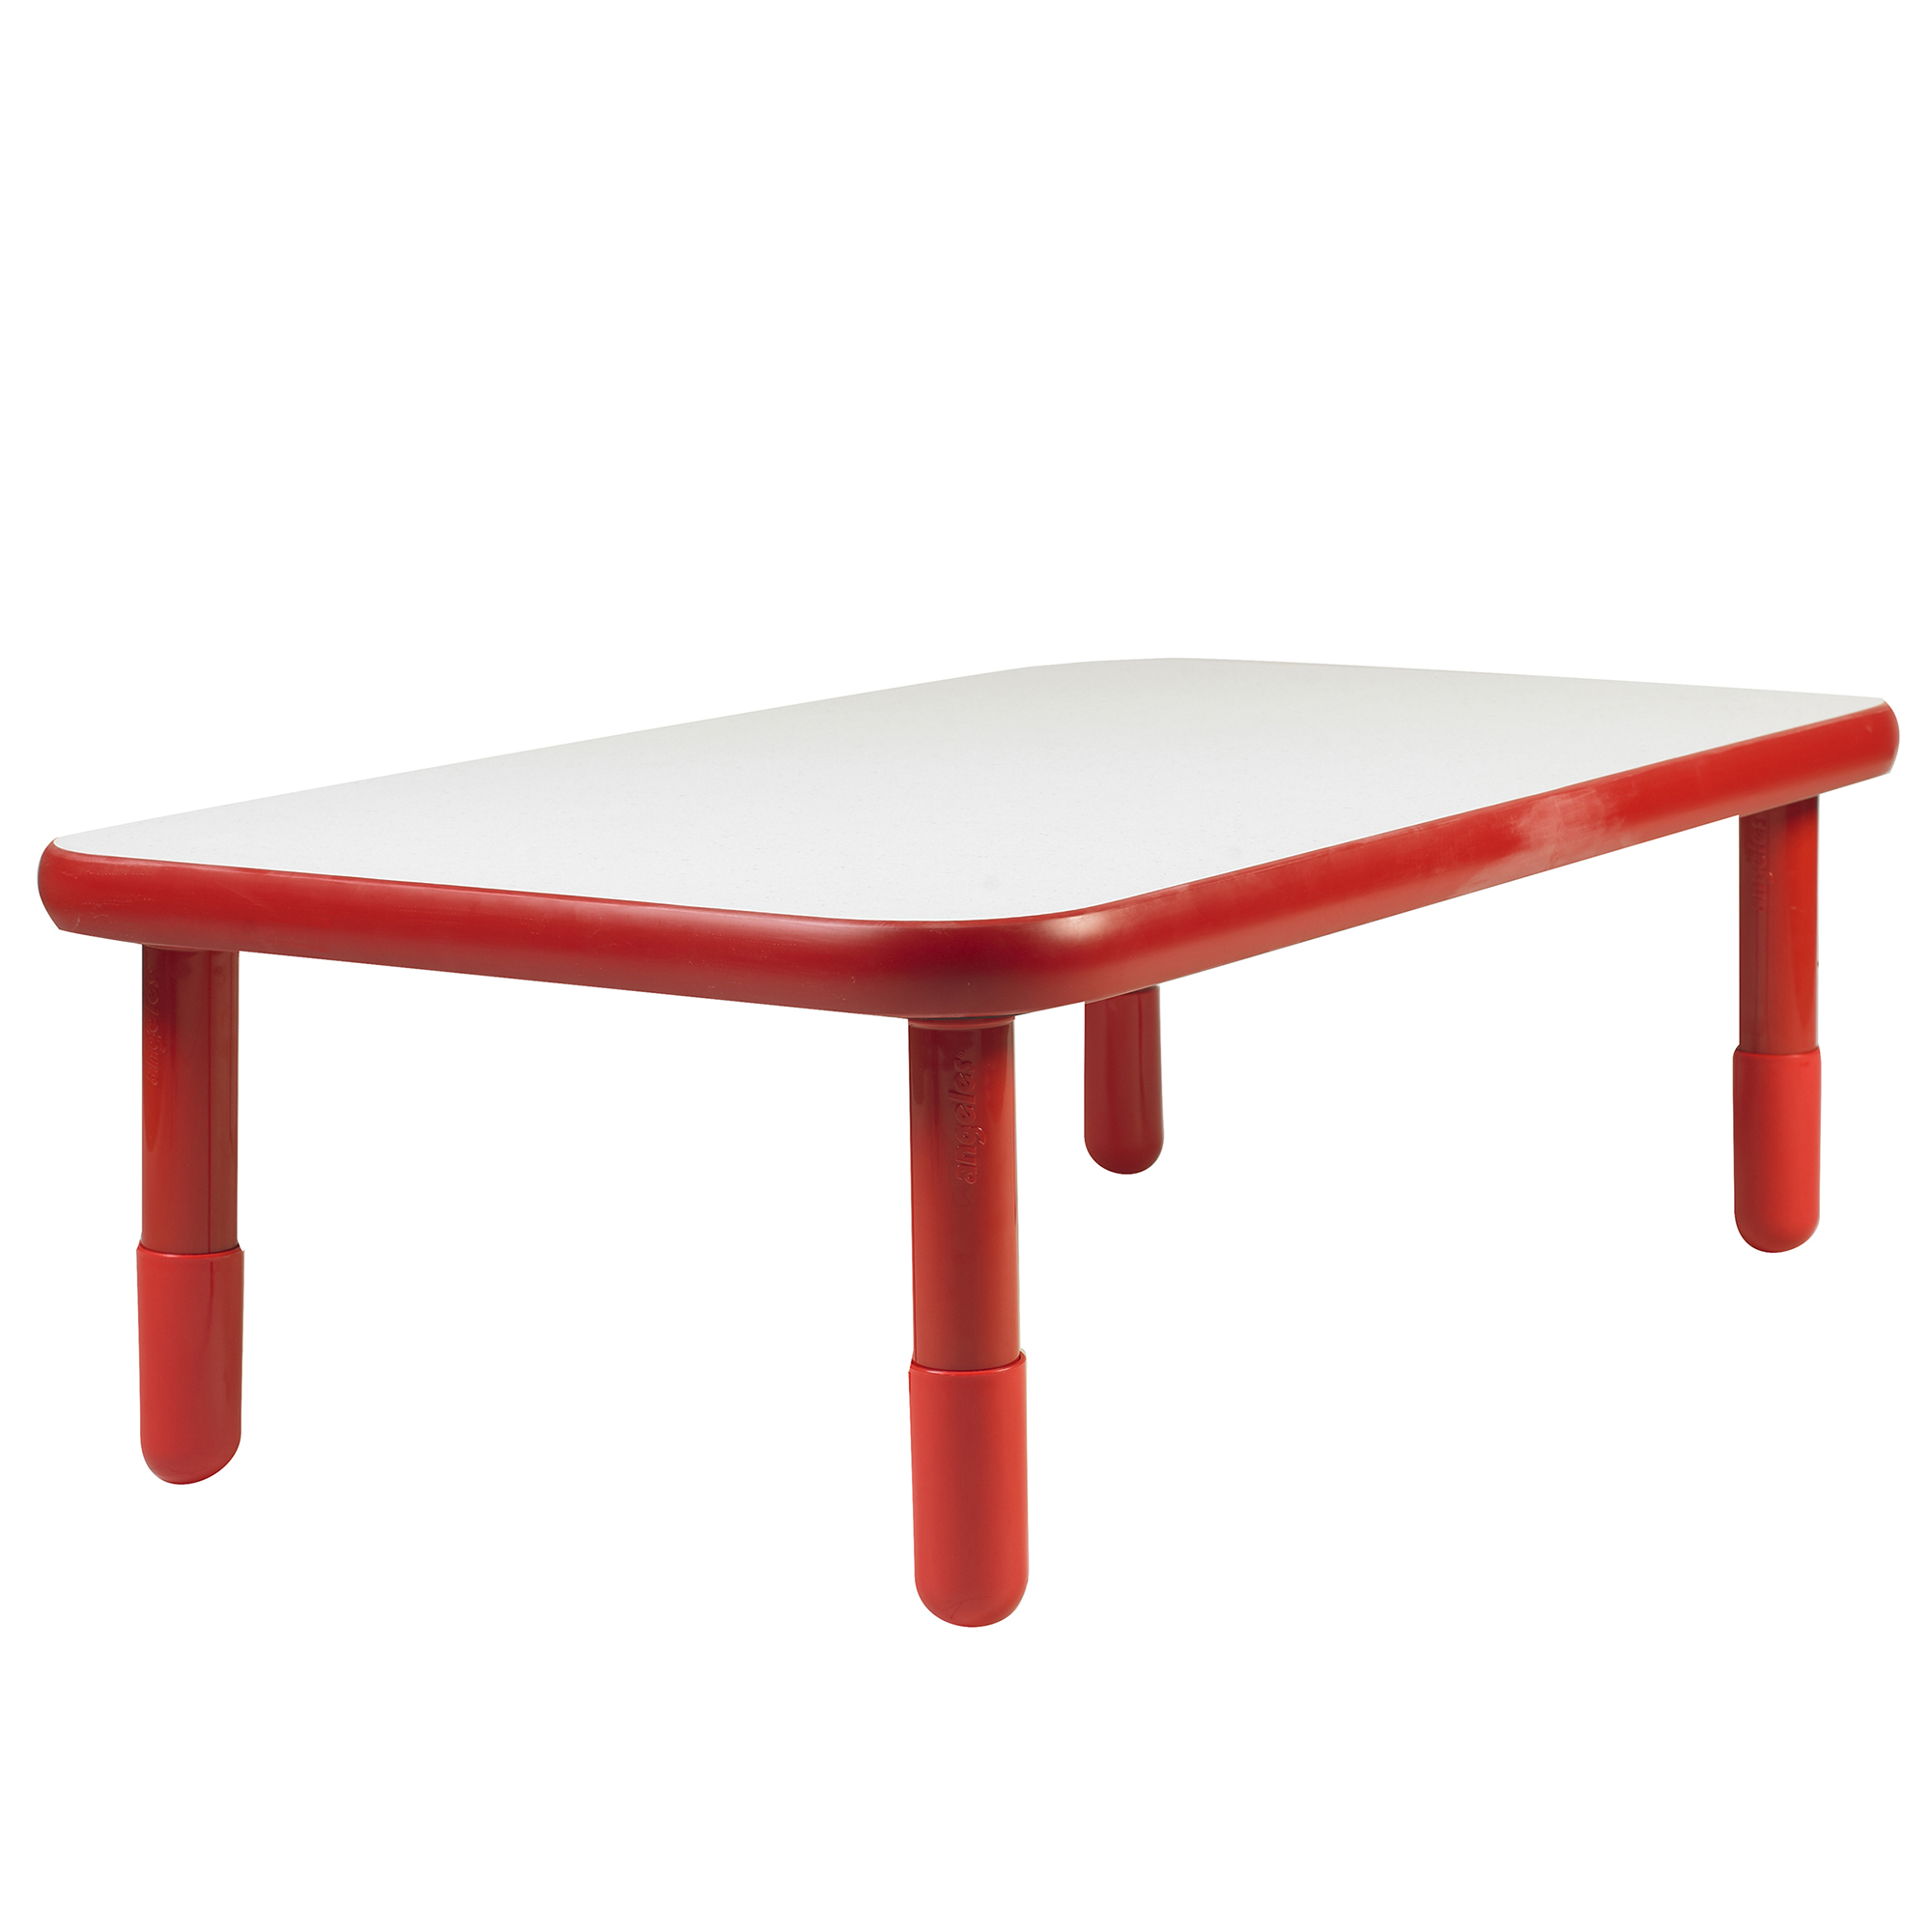 BaseLine® 122 cm  x 76 cm  Rectangular Table - Candy Apple Red with 40,5 cm  Legs